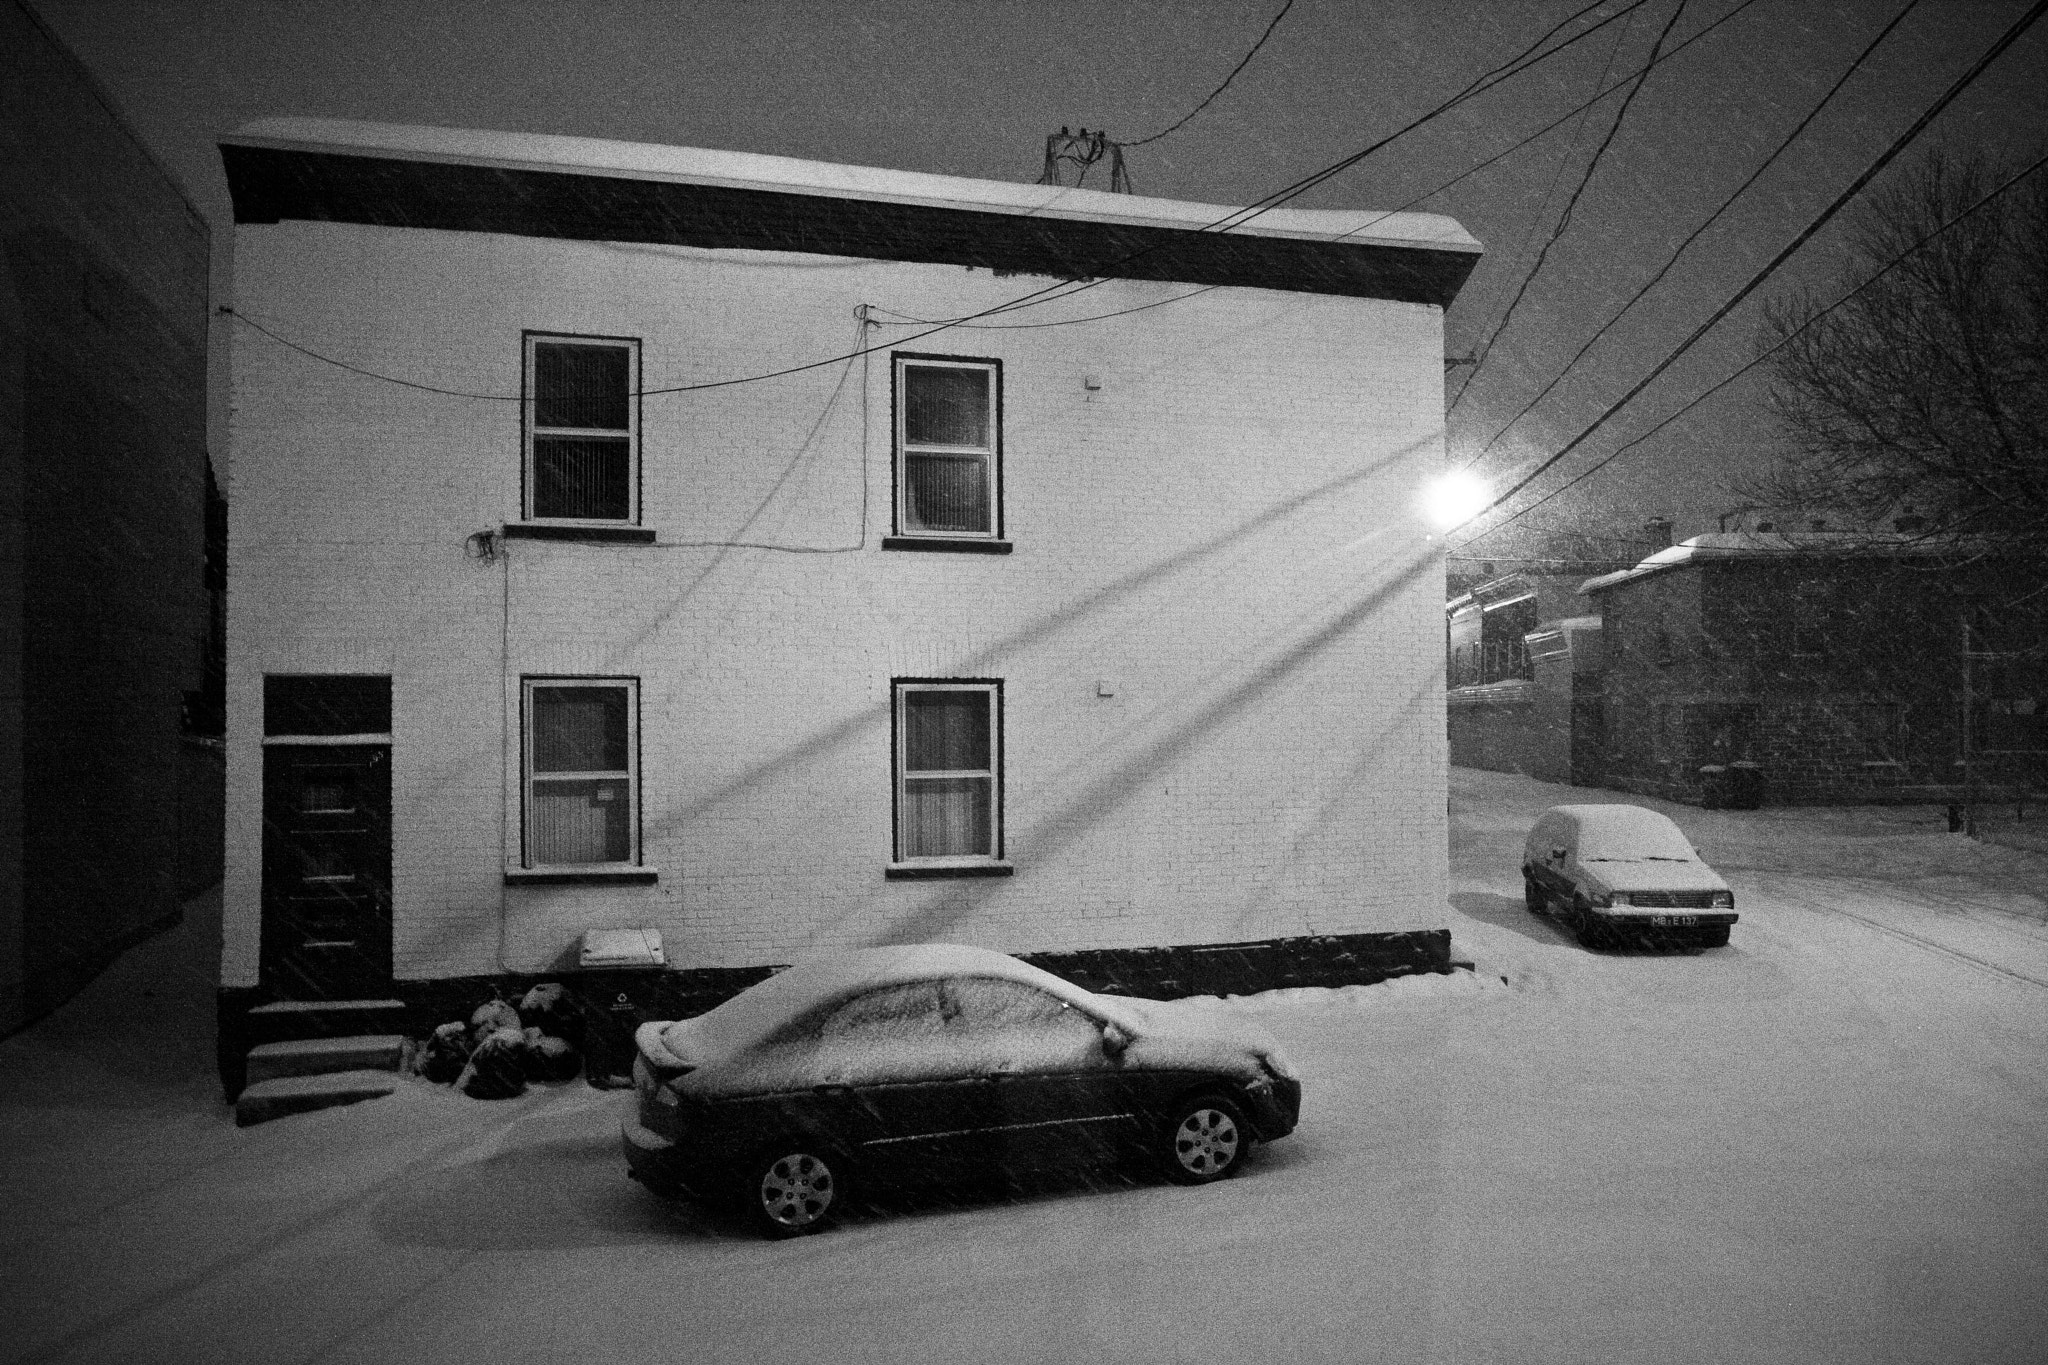 Canon EOS 40D + Sigma 15-30mm f/3.5-4.5 EX DG Aspherical sample photo. Snowstorm on st-ambroise street photography